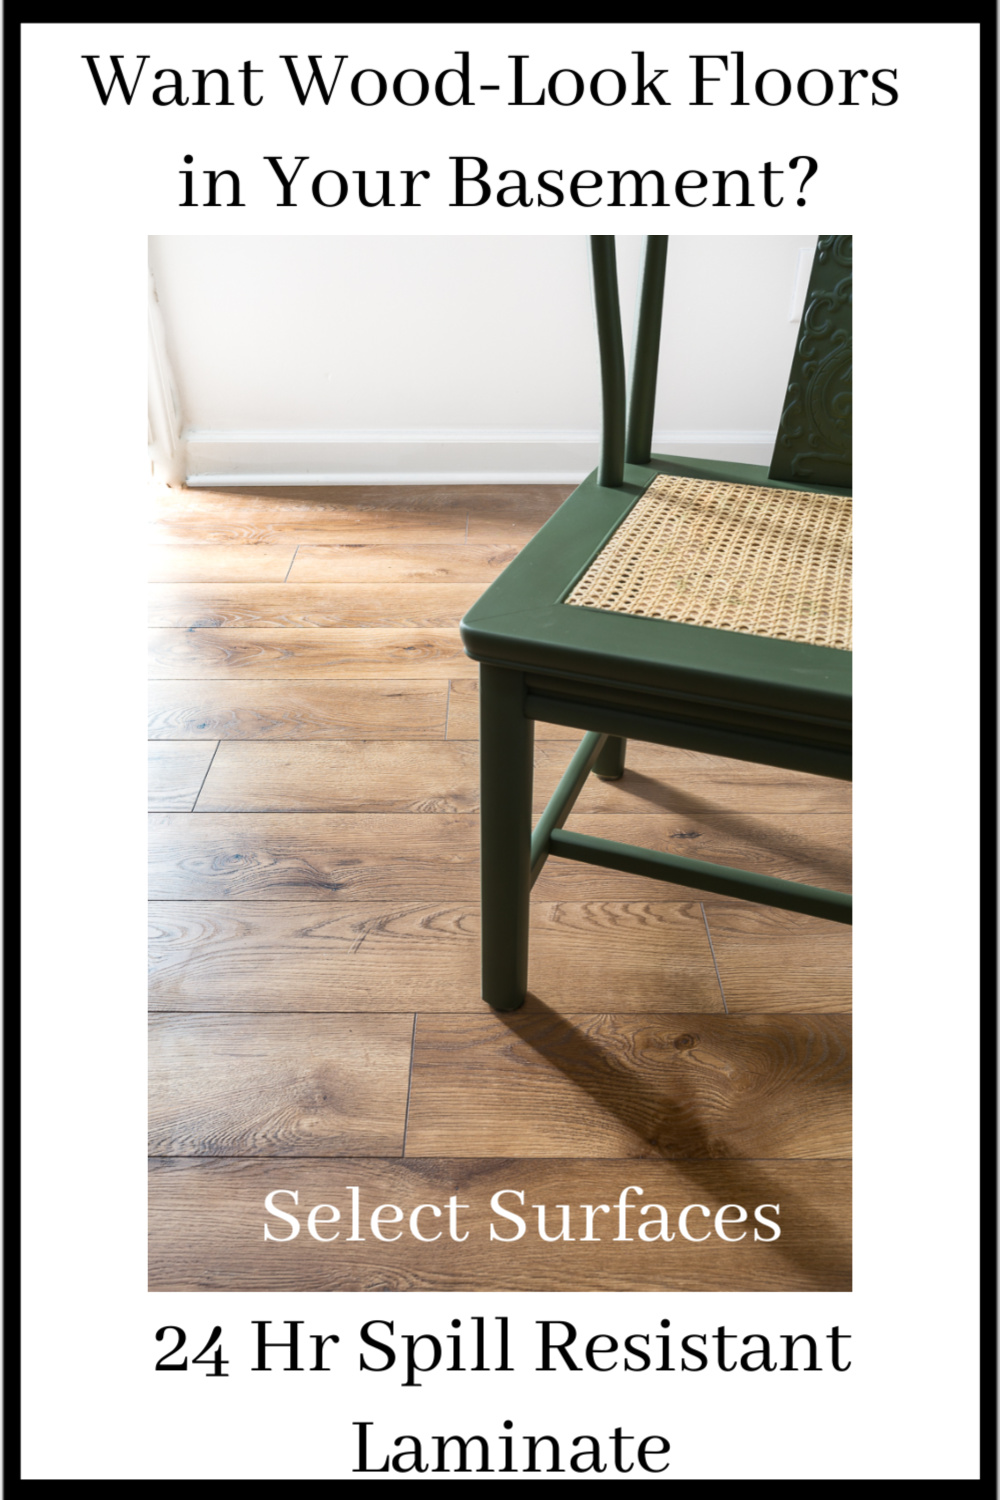 Why We Installed Select Surfaces Laminate Floors In Our Basement